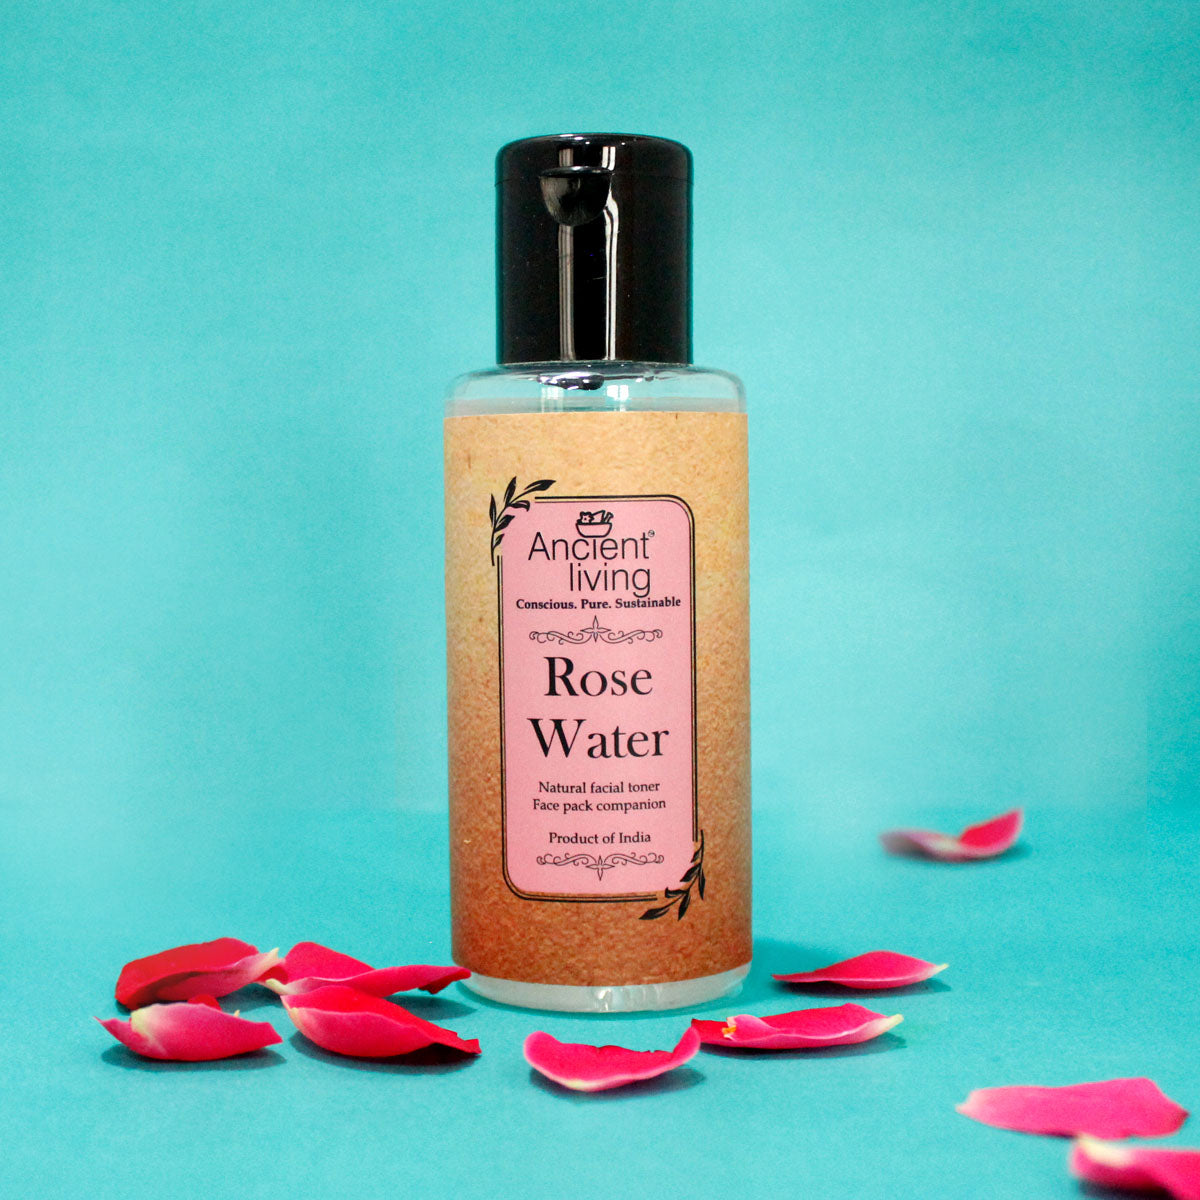 Rose Water - Ancient Living